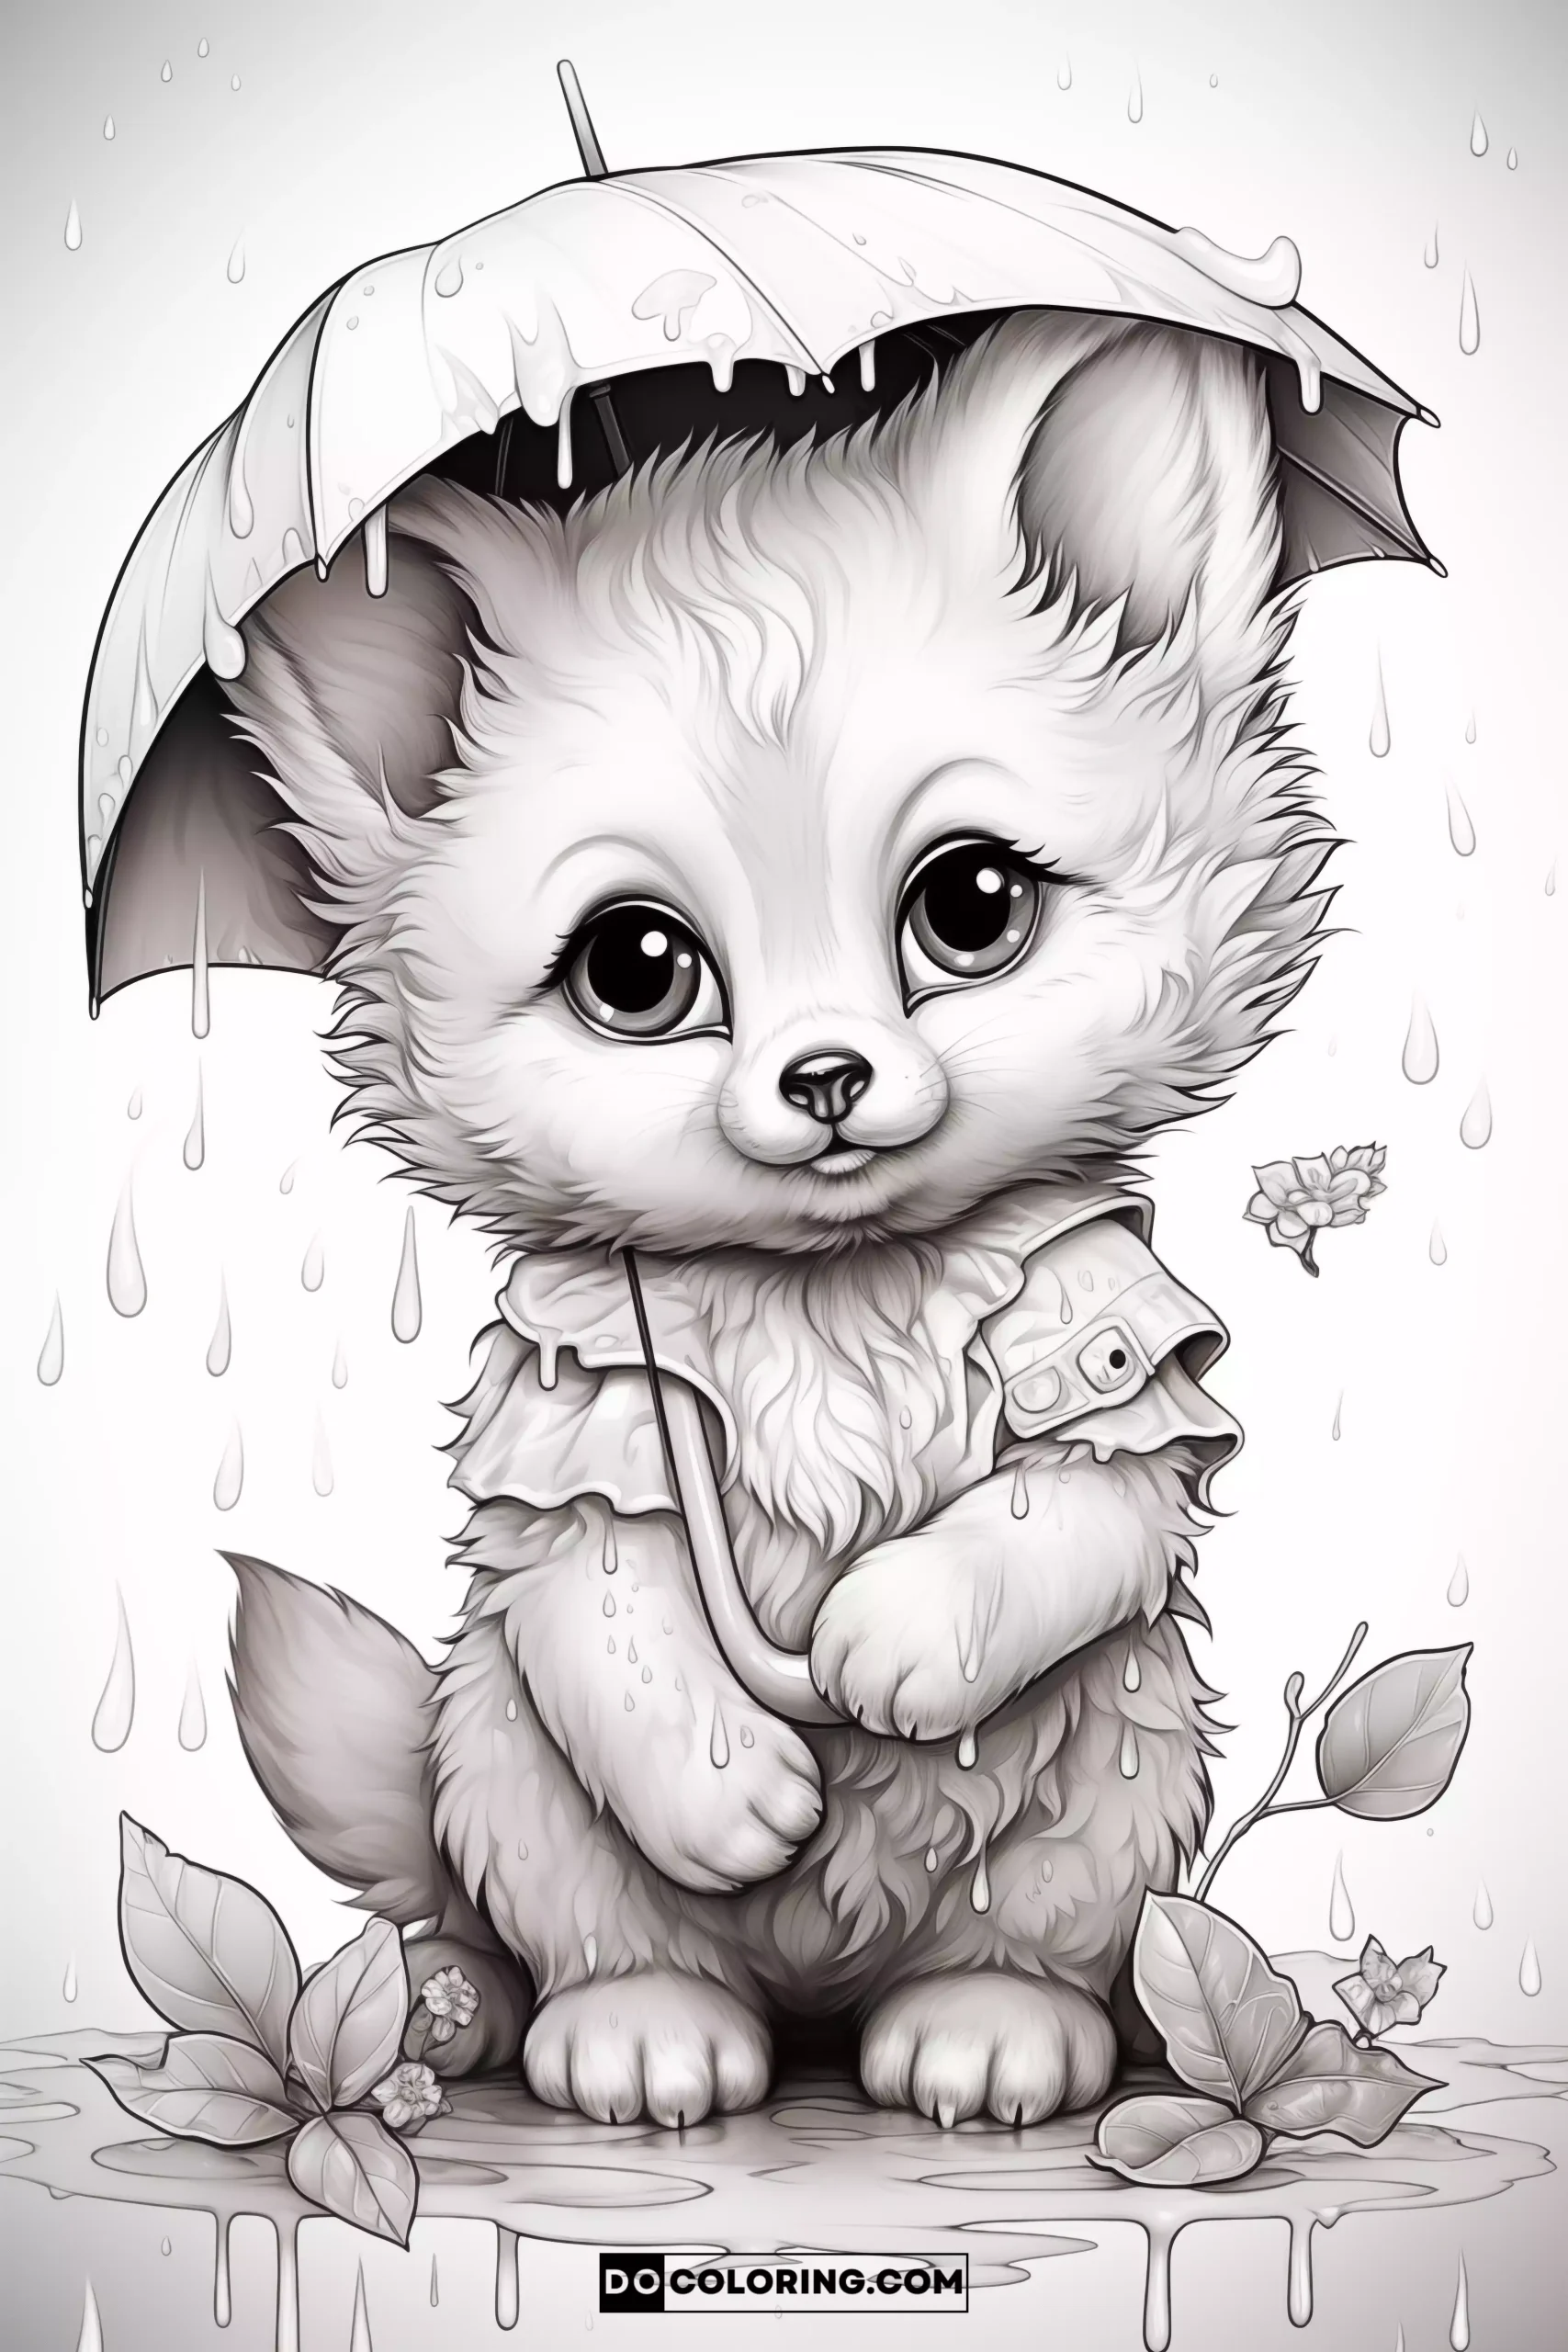 An adorable cartoon image of a baby fox, intricately detailed to offer a enjoyable coloring for adults.